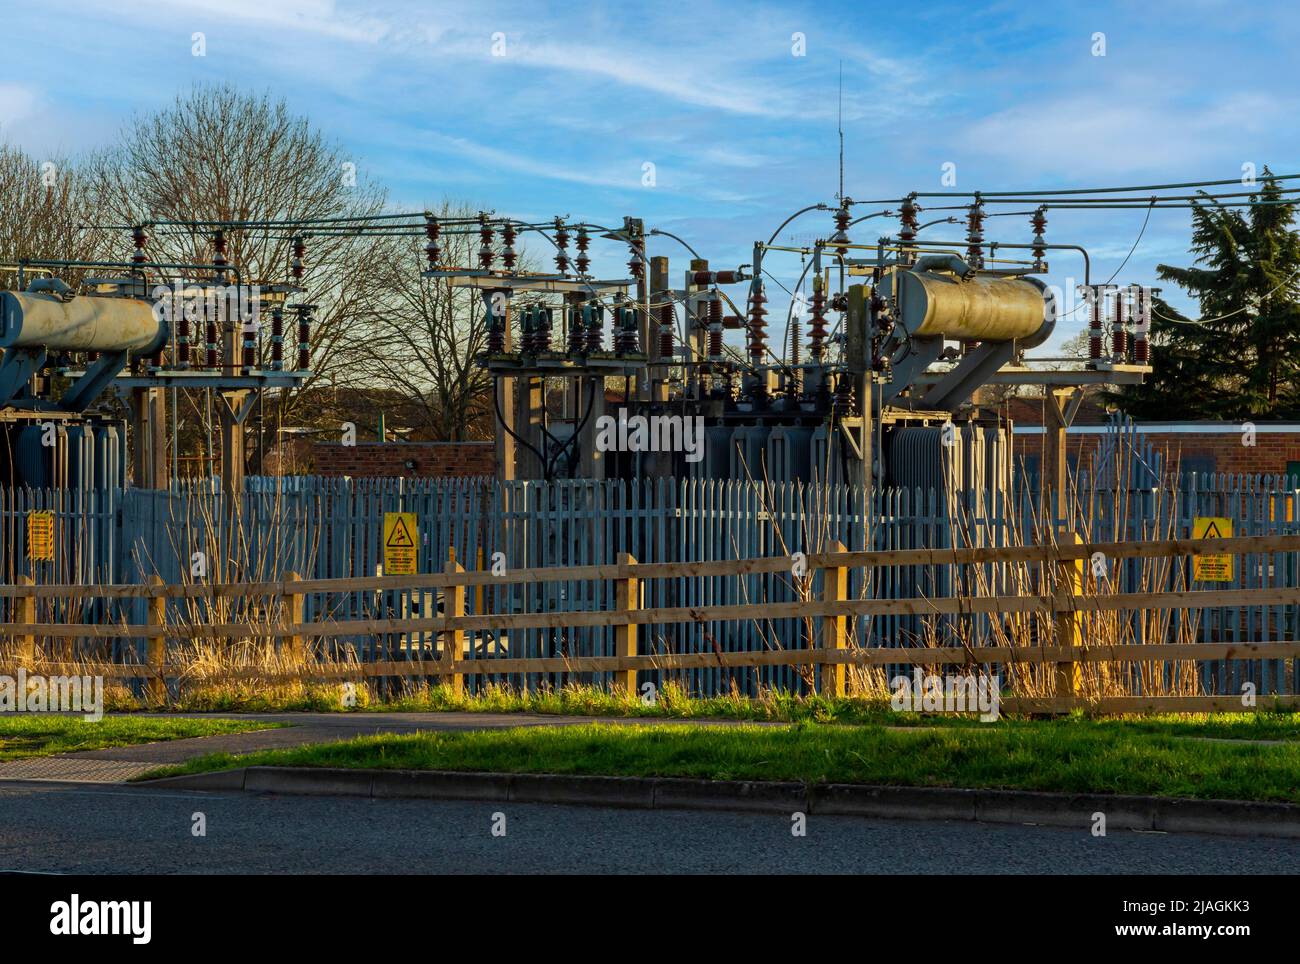 Electrical substation with metal and wooden fencing in foreground in Tewkesbury Gloucestershire England UK. Stock Photo